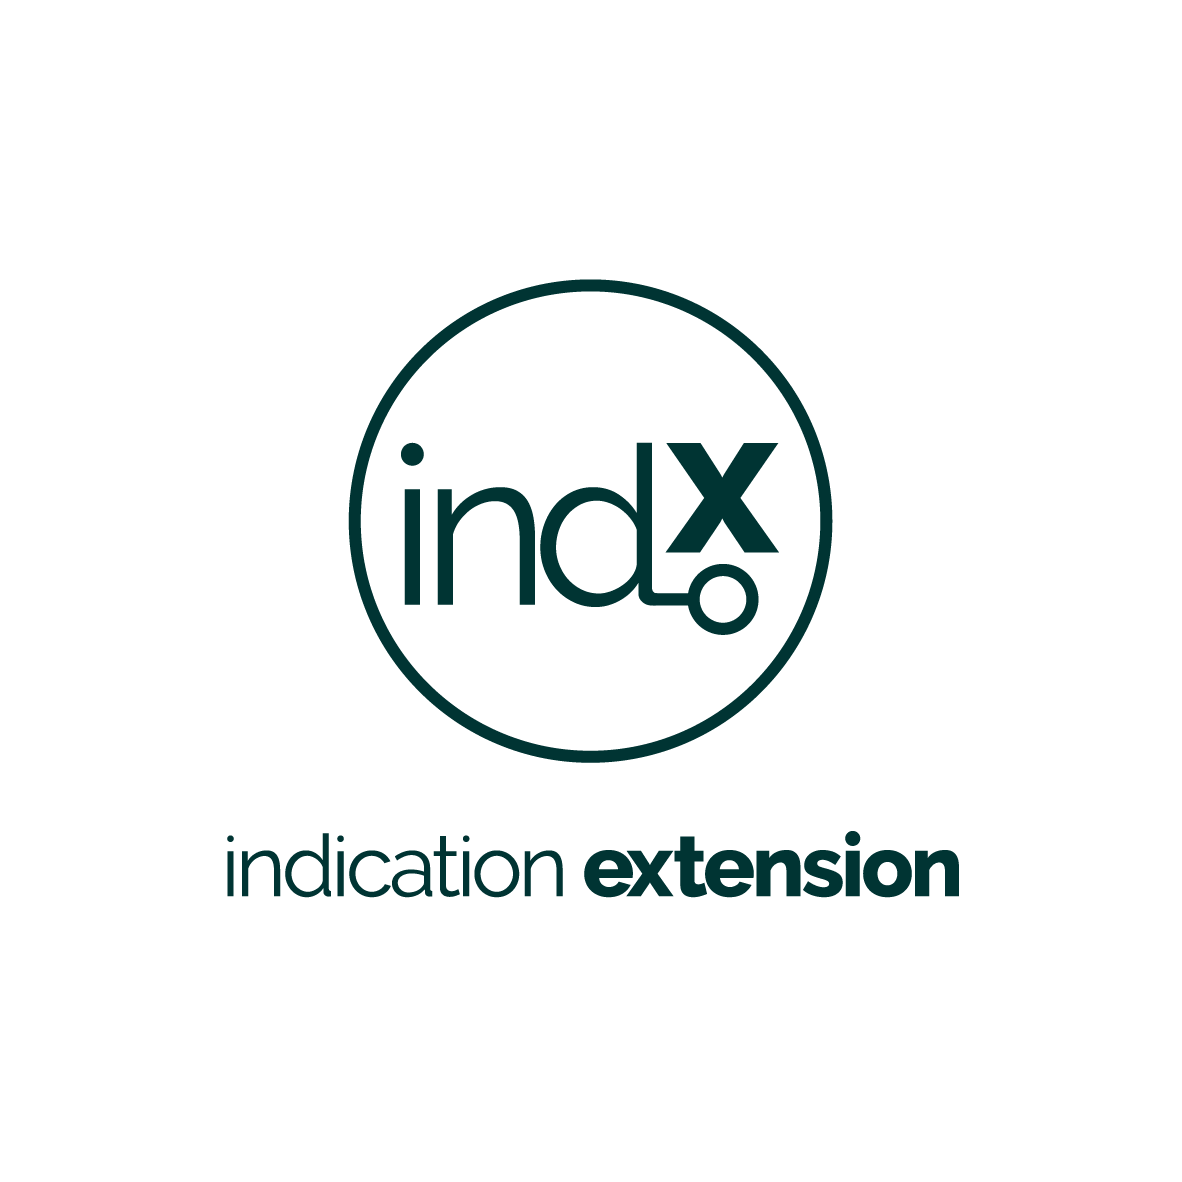 Indication extension